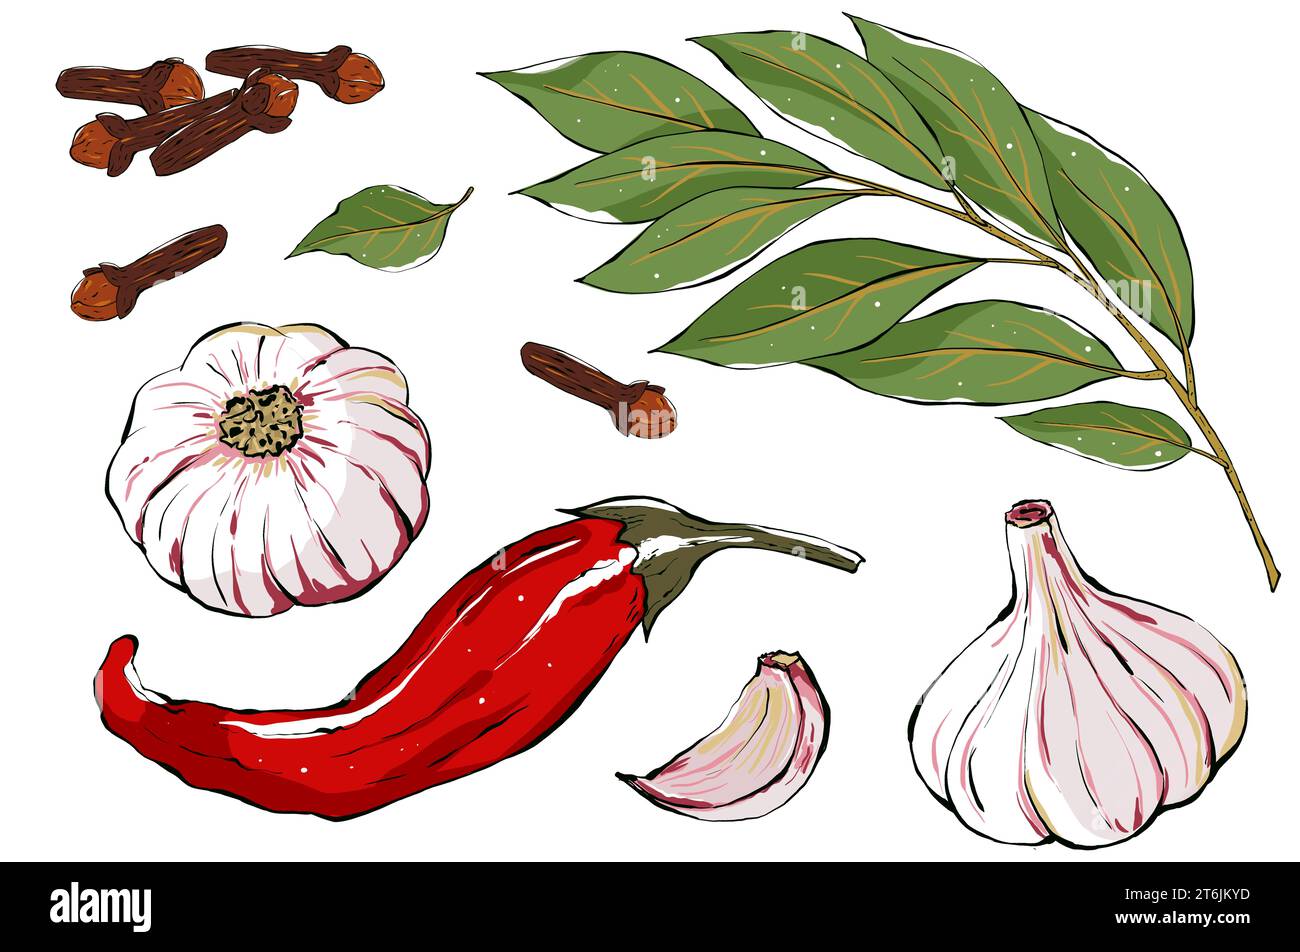 Set of herbs and spices. Hand drawn food illustration in sketch style. Illustration of aromatic plants for recipe, packaging, logo. Stock Photo